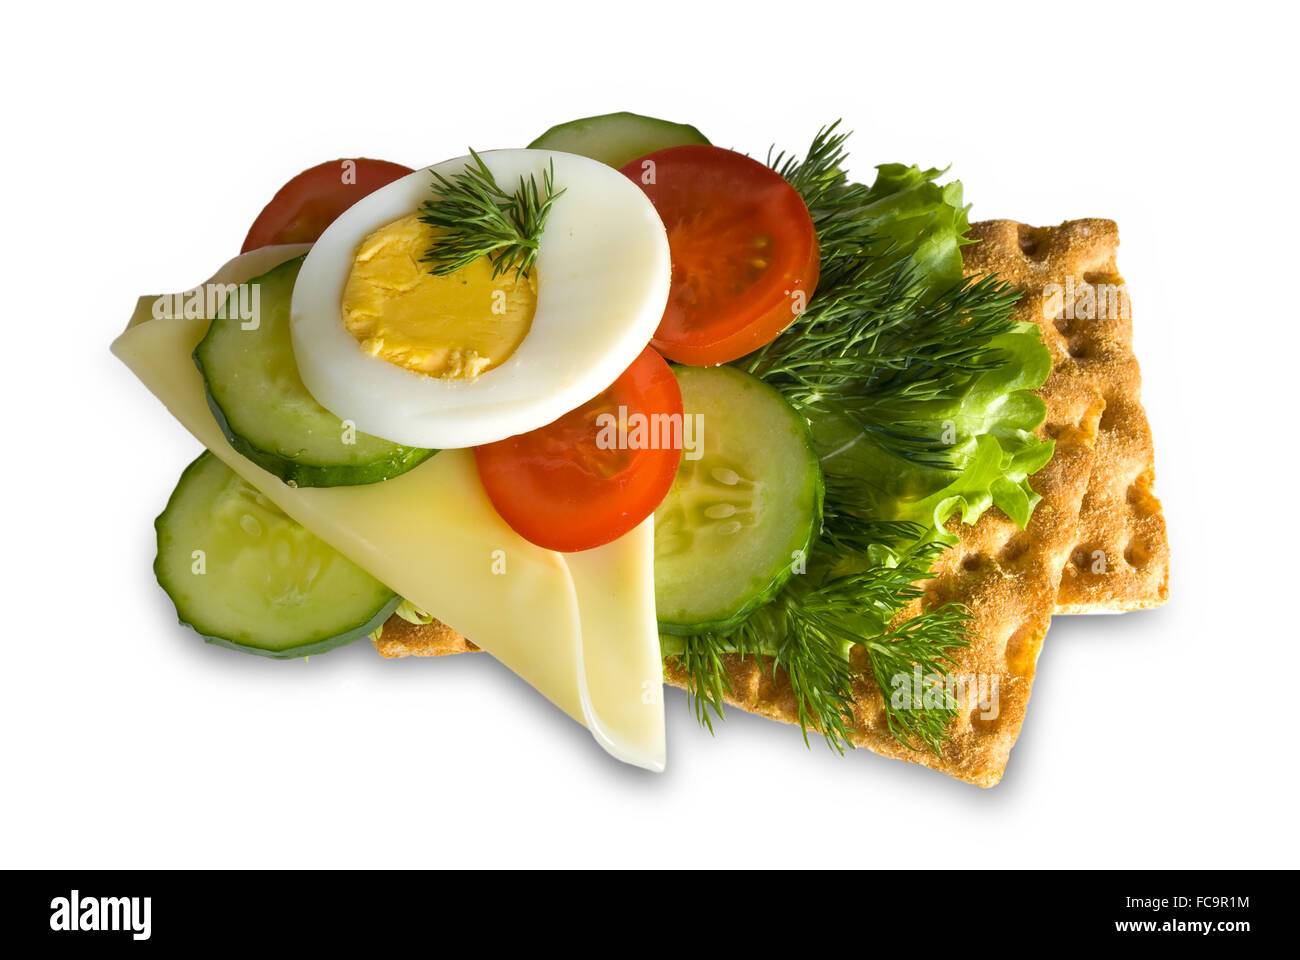 Green loaf Cut Out Stock Images & Pictures - Alamy